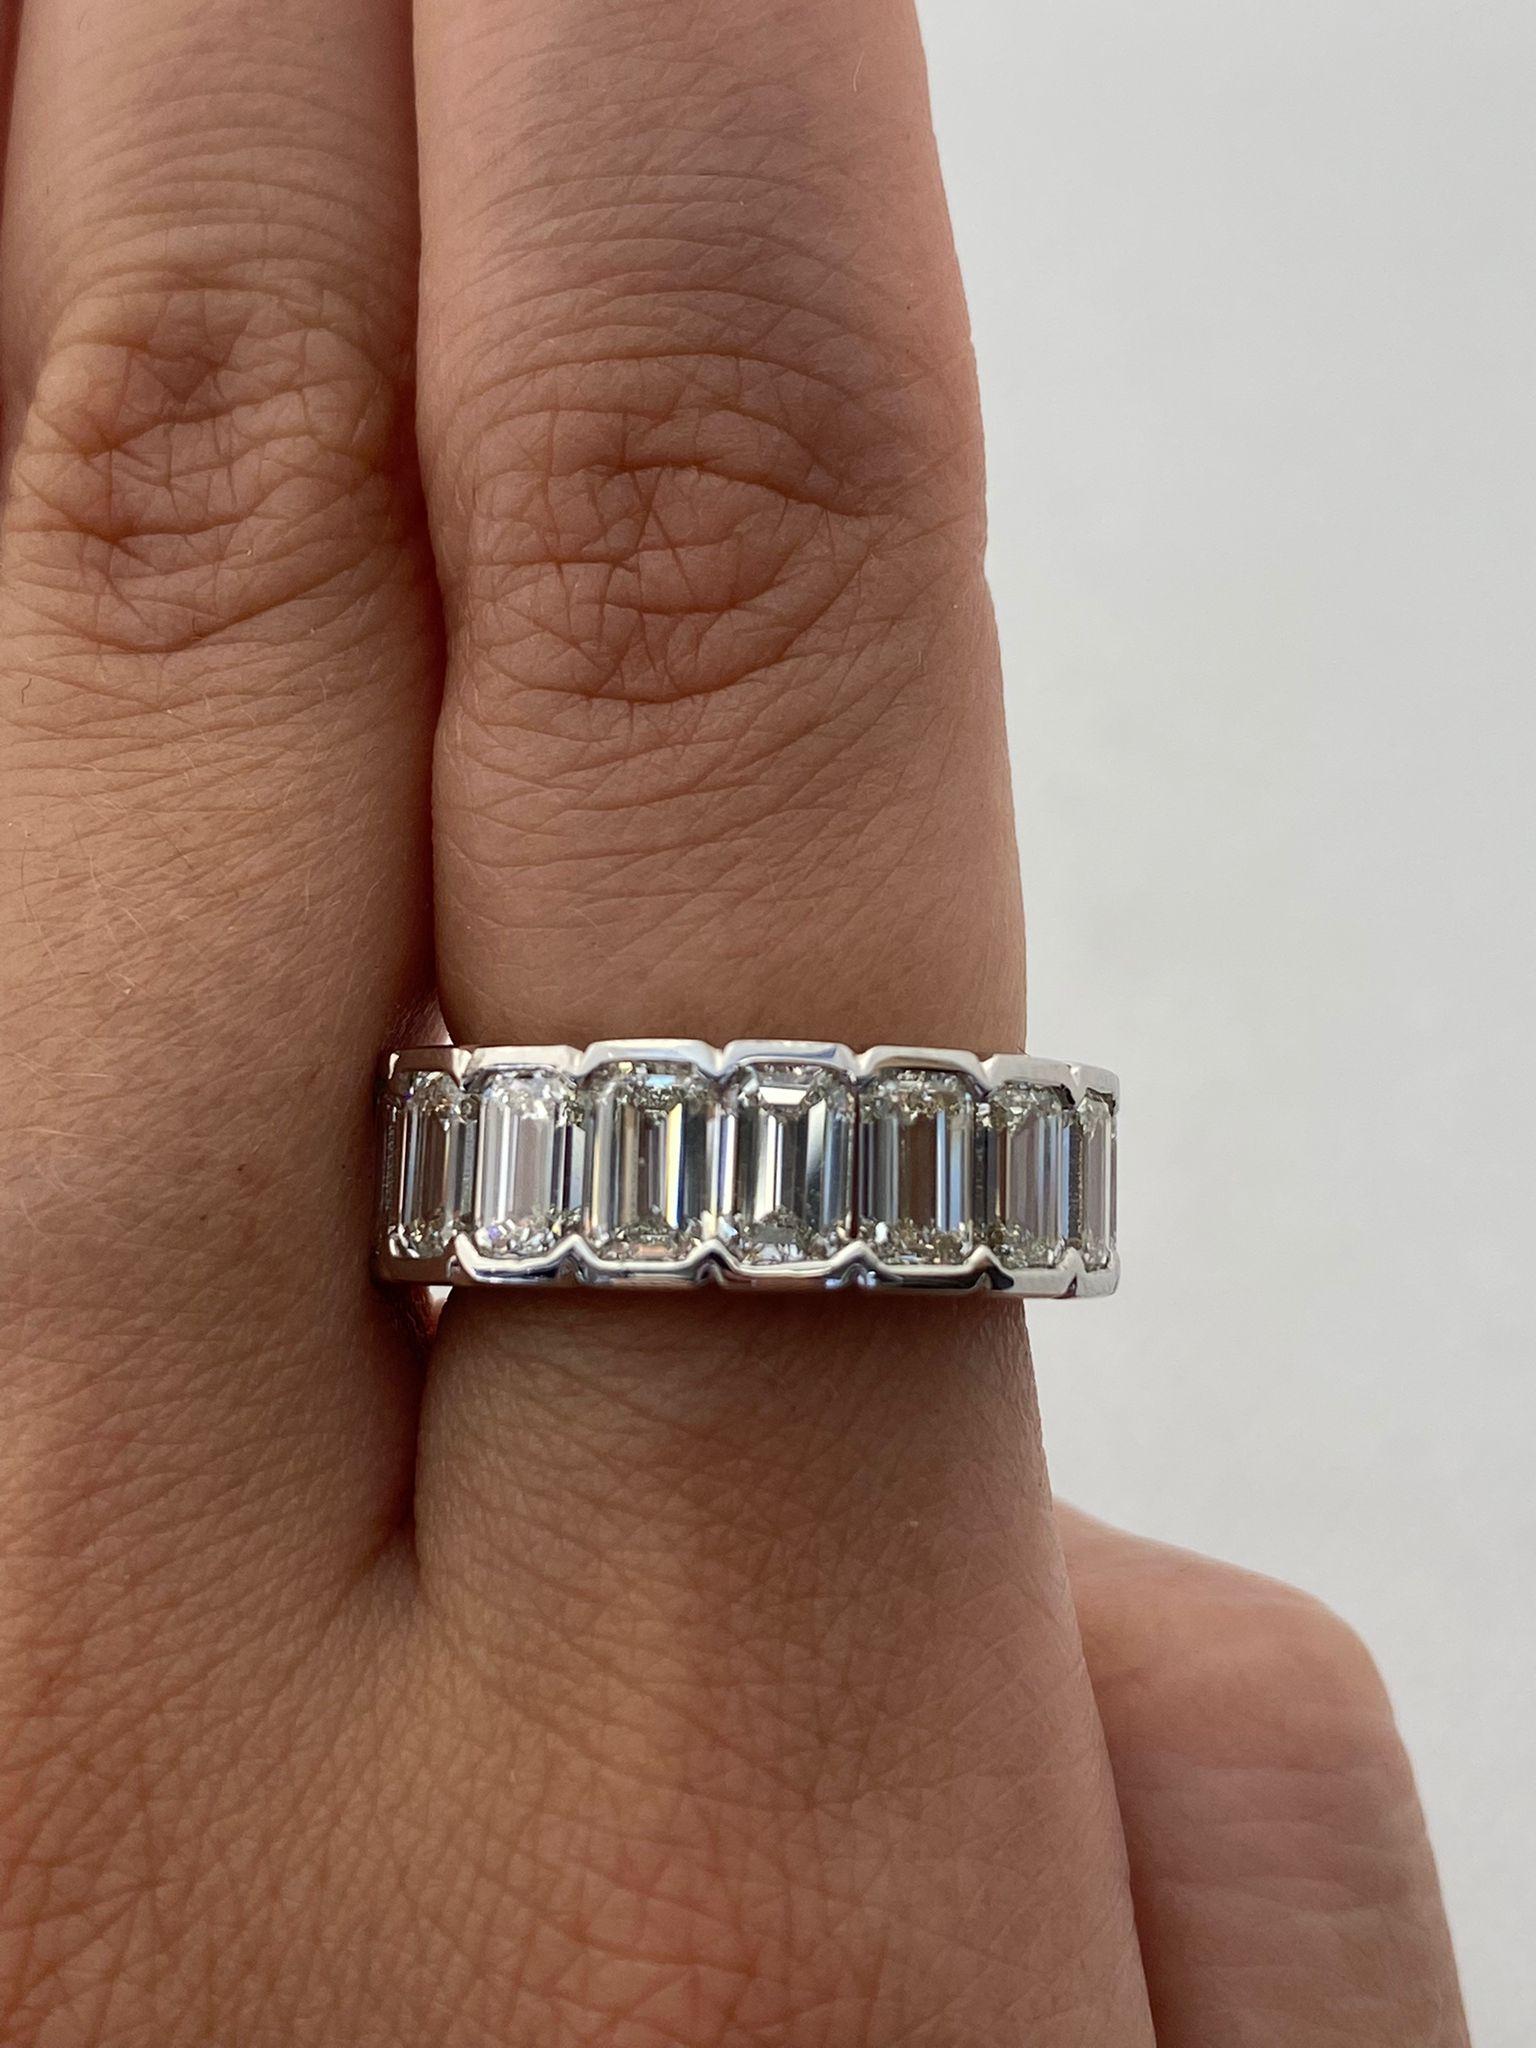 18 perfectly matched Emerald Cut Diamonds of H-I color and VS-VVS Clarity. Set in Platinum in a semi-bezel setting.
Long Stones measuring 5.5-5.7mm
9.01 Carats Total. Each stone weighs 0.50 Carat on average. 

Available in all shapes and budgets